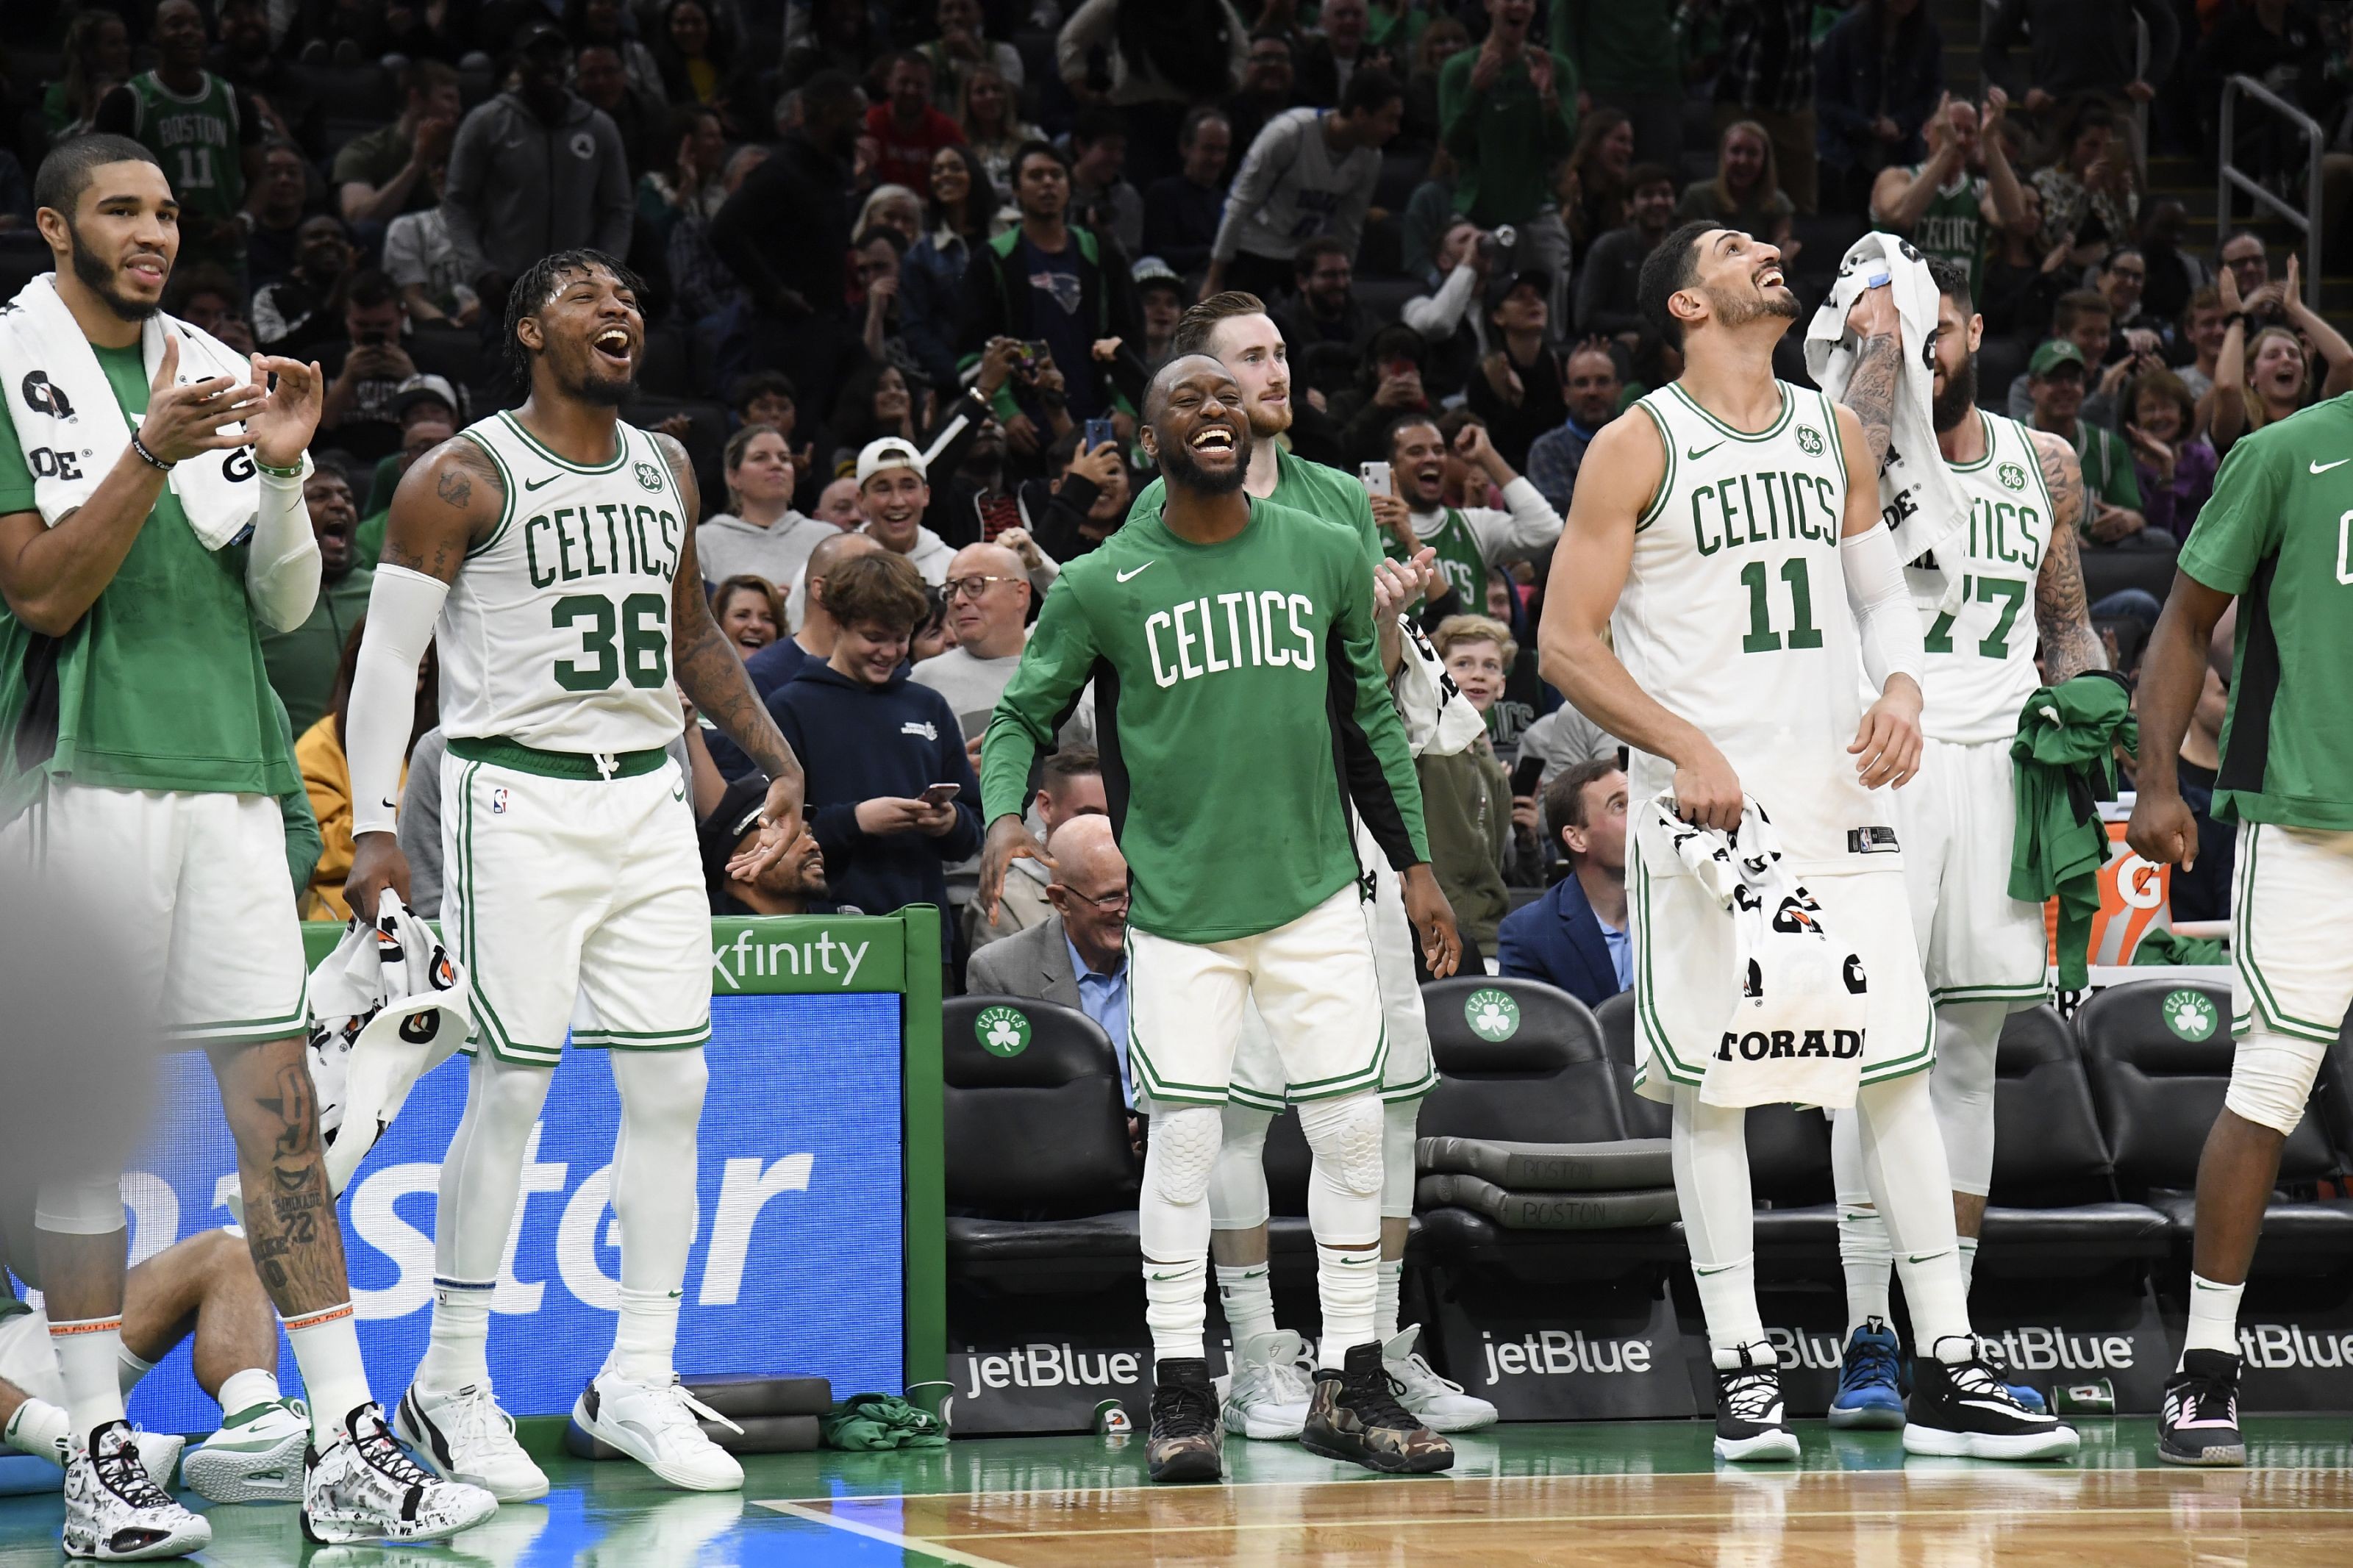 Powerranking the Boston Celtics players most deserving to win the MVP